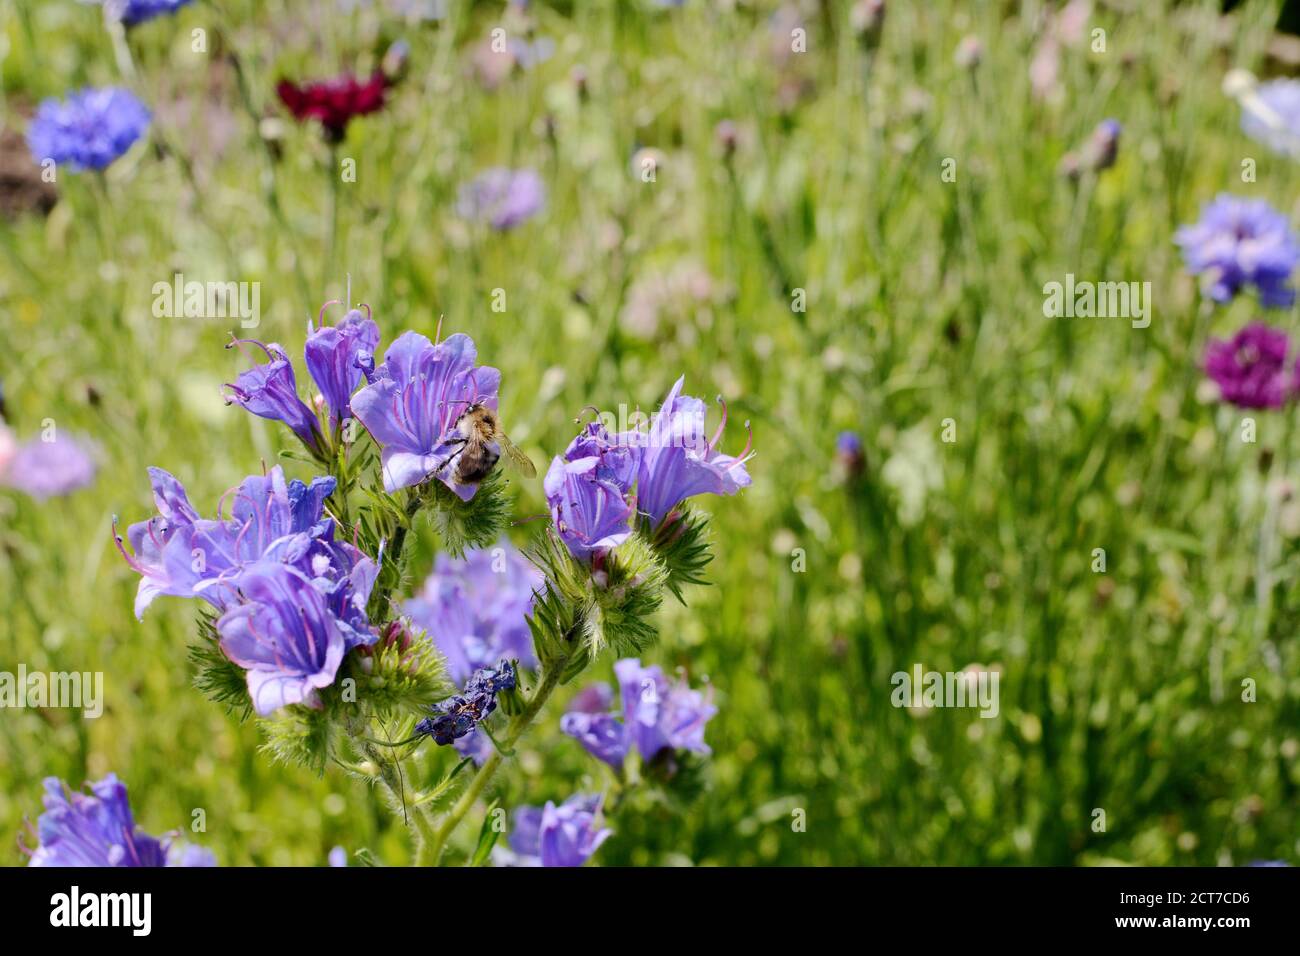 Close-up of a shrill carder bee gathering nectar and pollen from blue viper's bugloss flowers; copy space on wildflowers Stock Photo